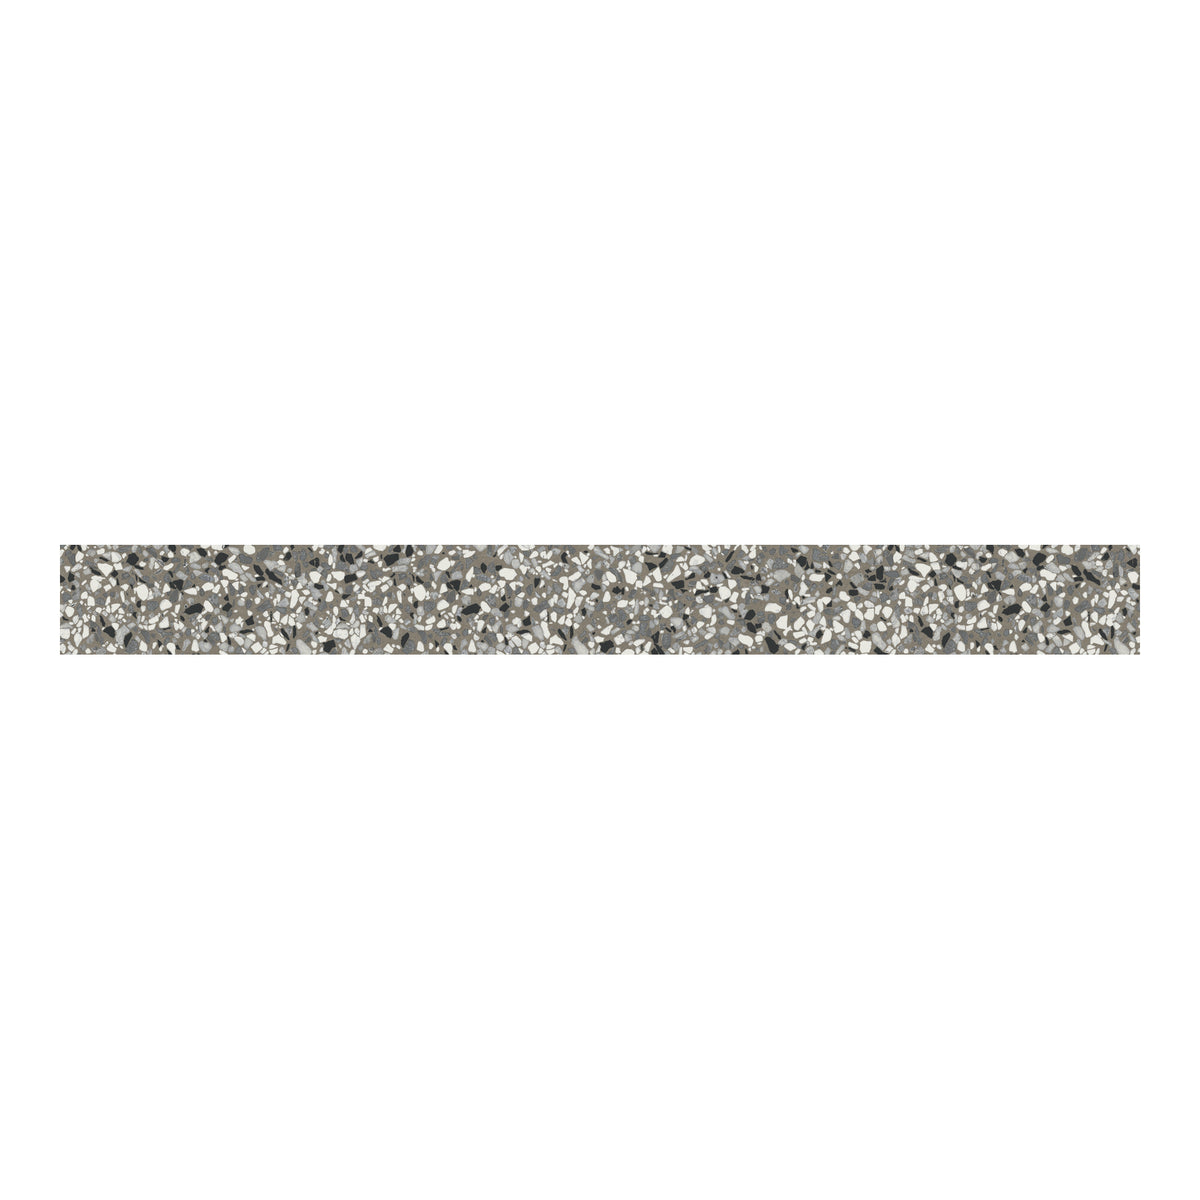 Daltile - Modernist 3 in. x 24 in. Colorbody Porcelain Bullnose - Prouve Steel